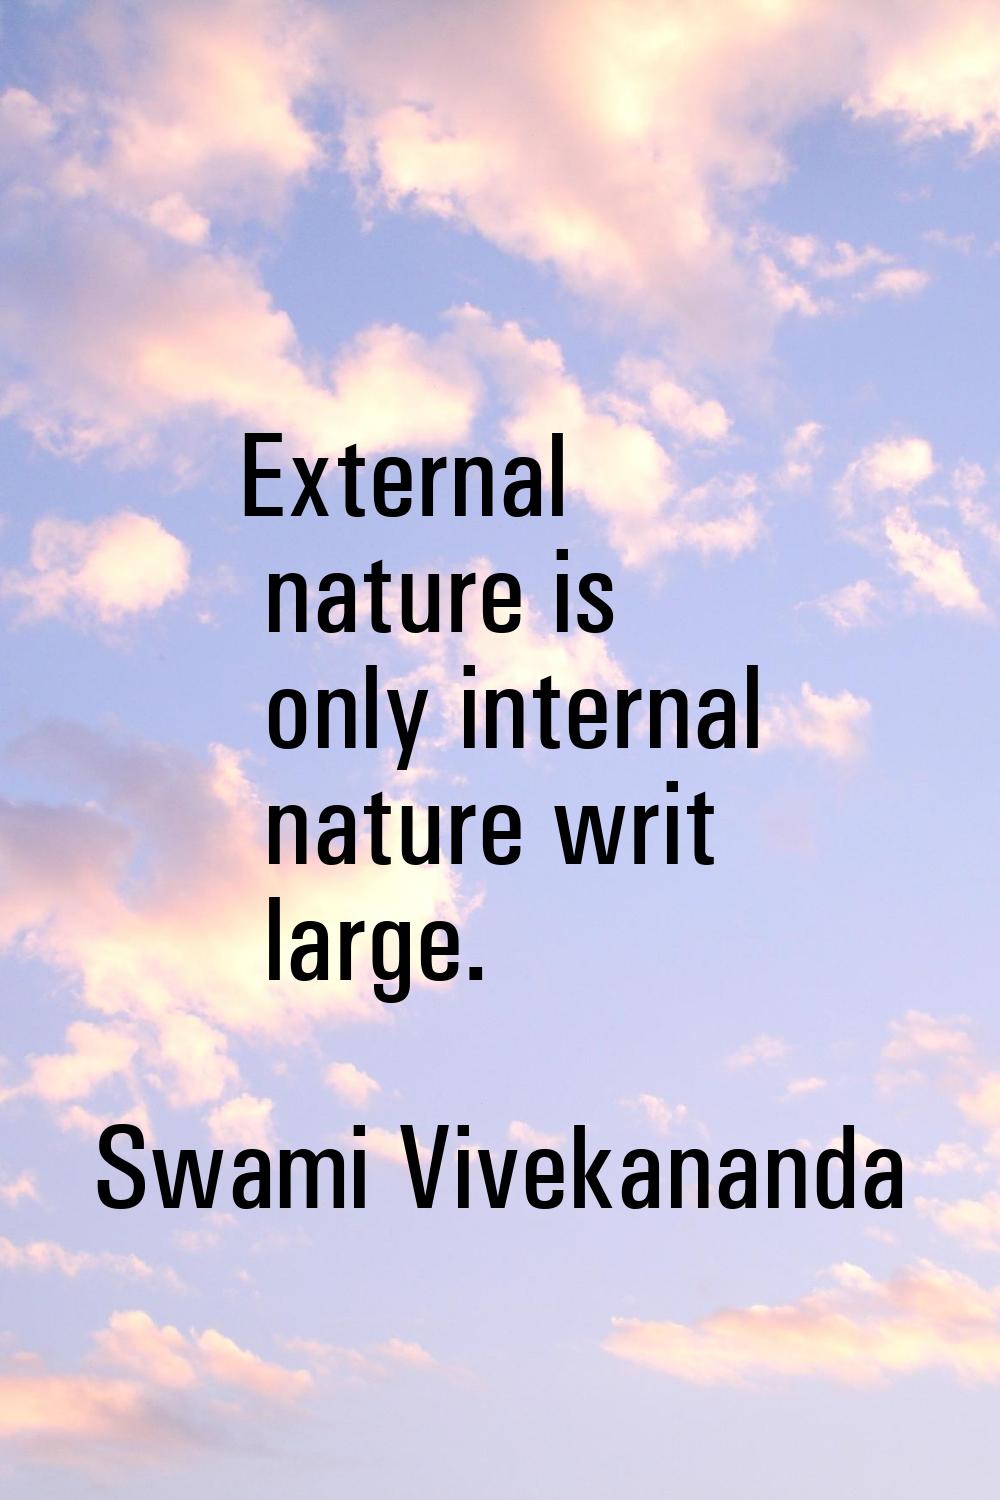 External nature is only internal nature writ large.